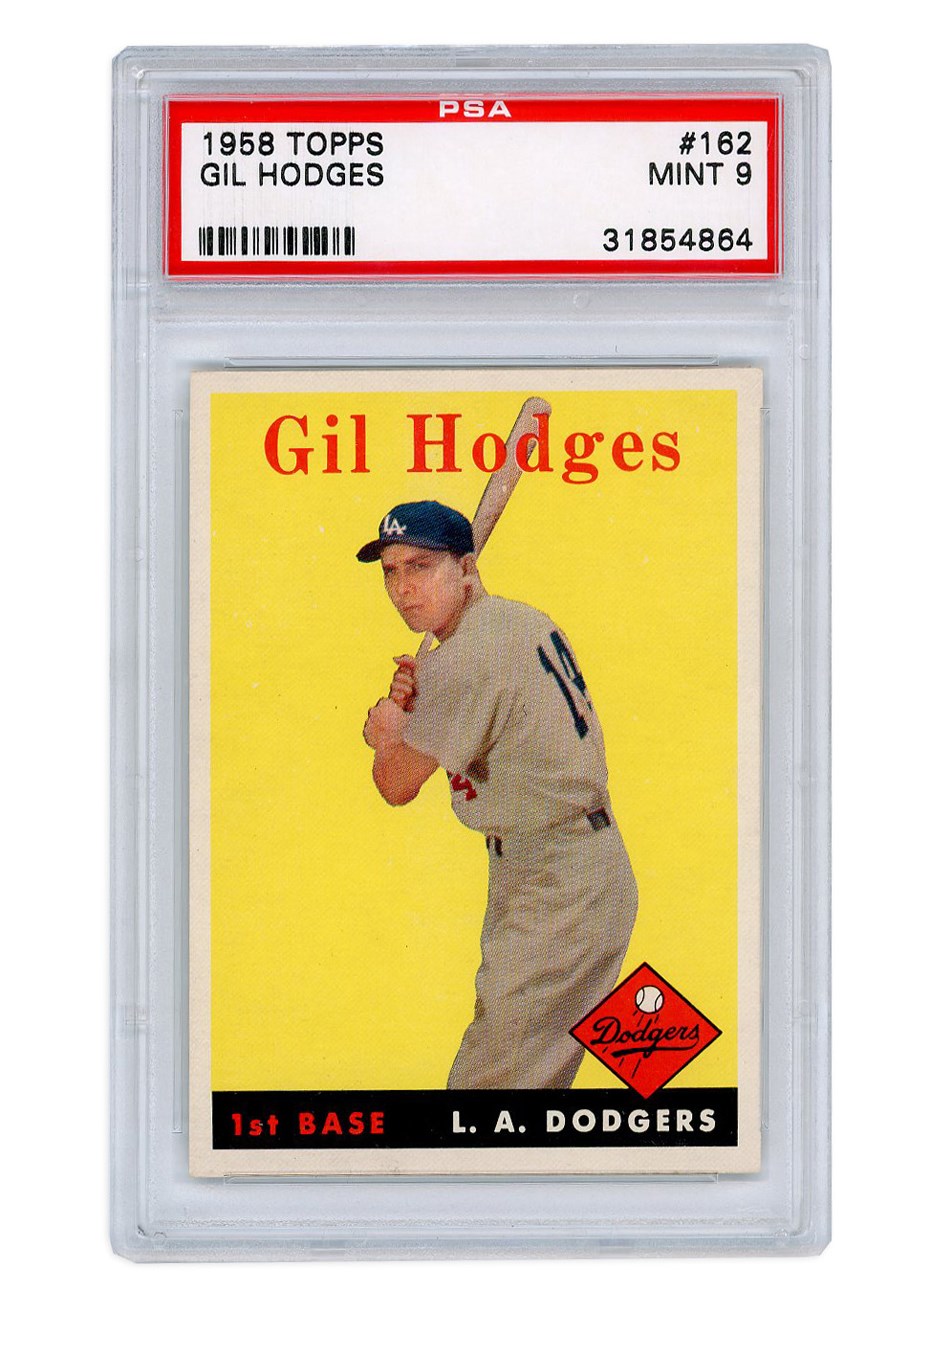 Baseball and Trading Cards - 1958 Topps #162 Gil Hodges - PSA MINT 9